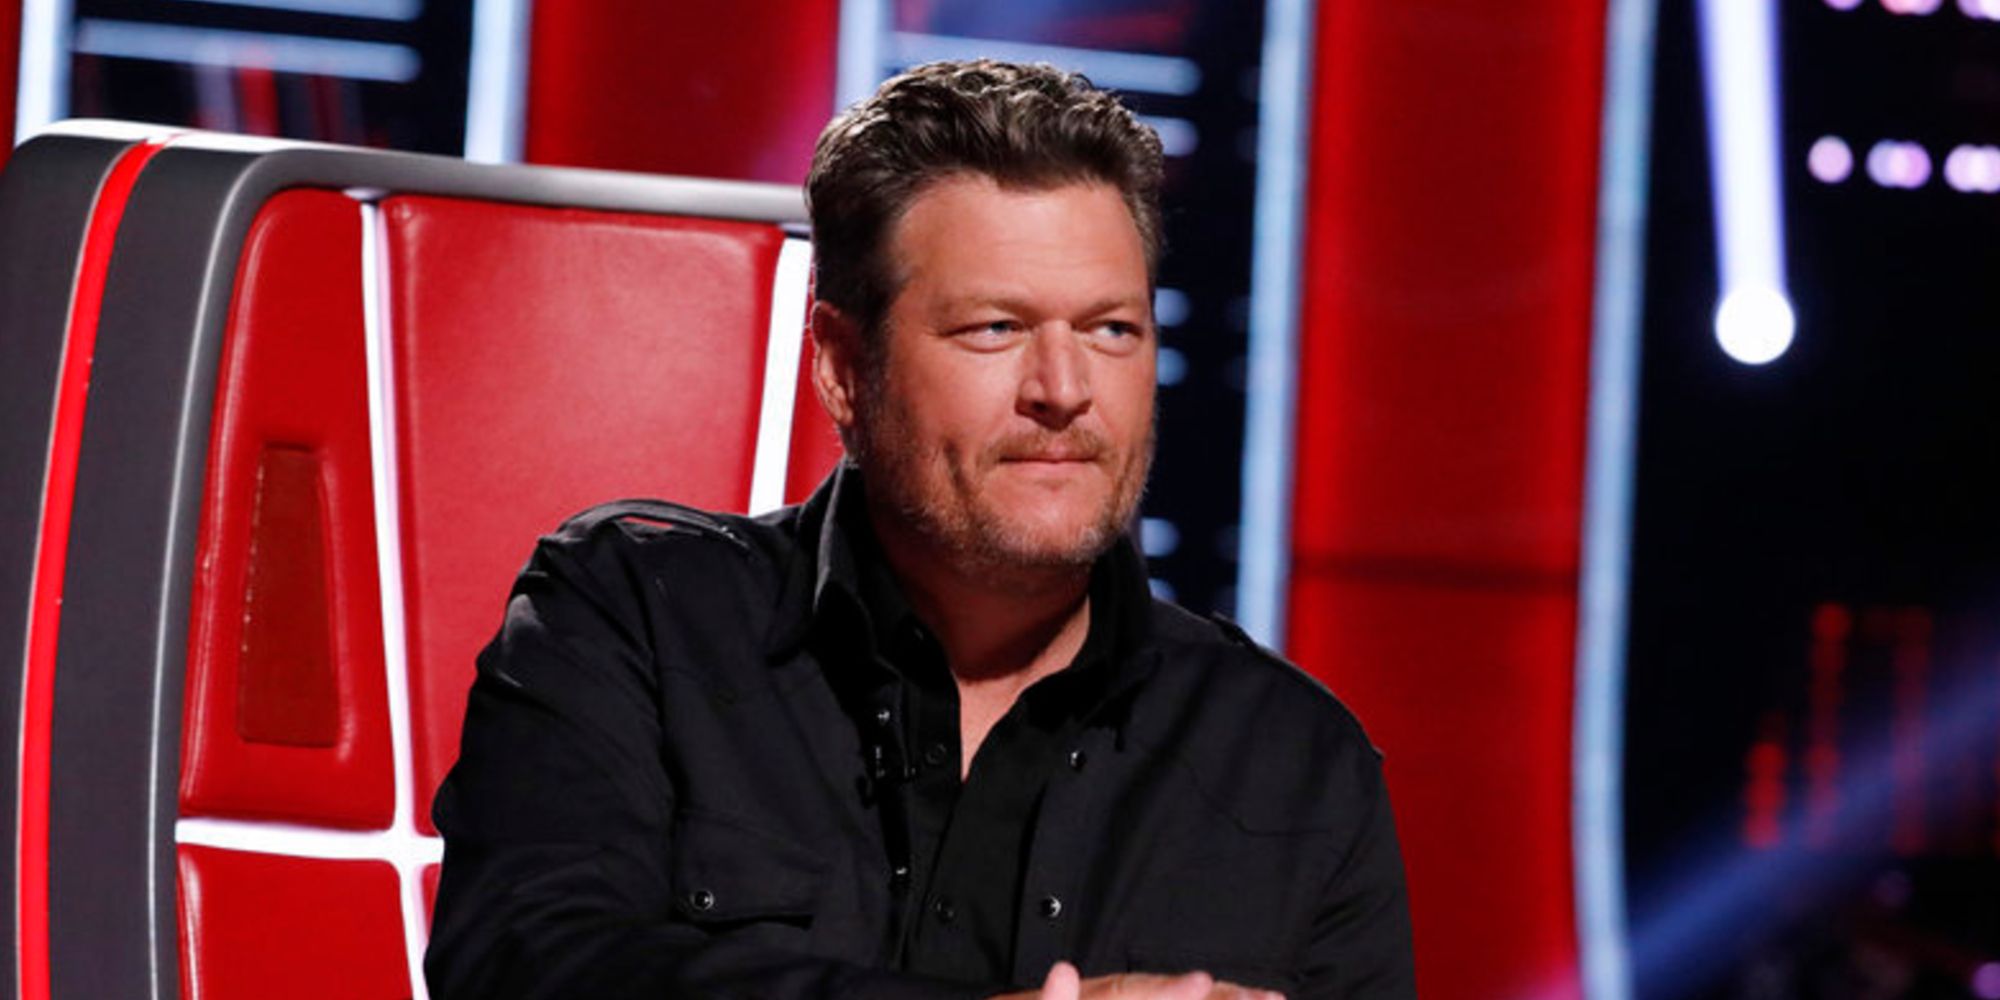 Blake Shelton sitting in a red chair on The Voice